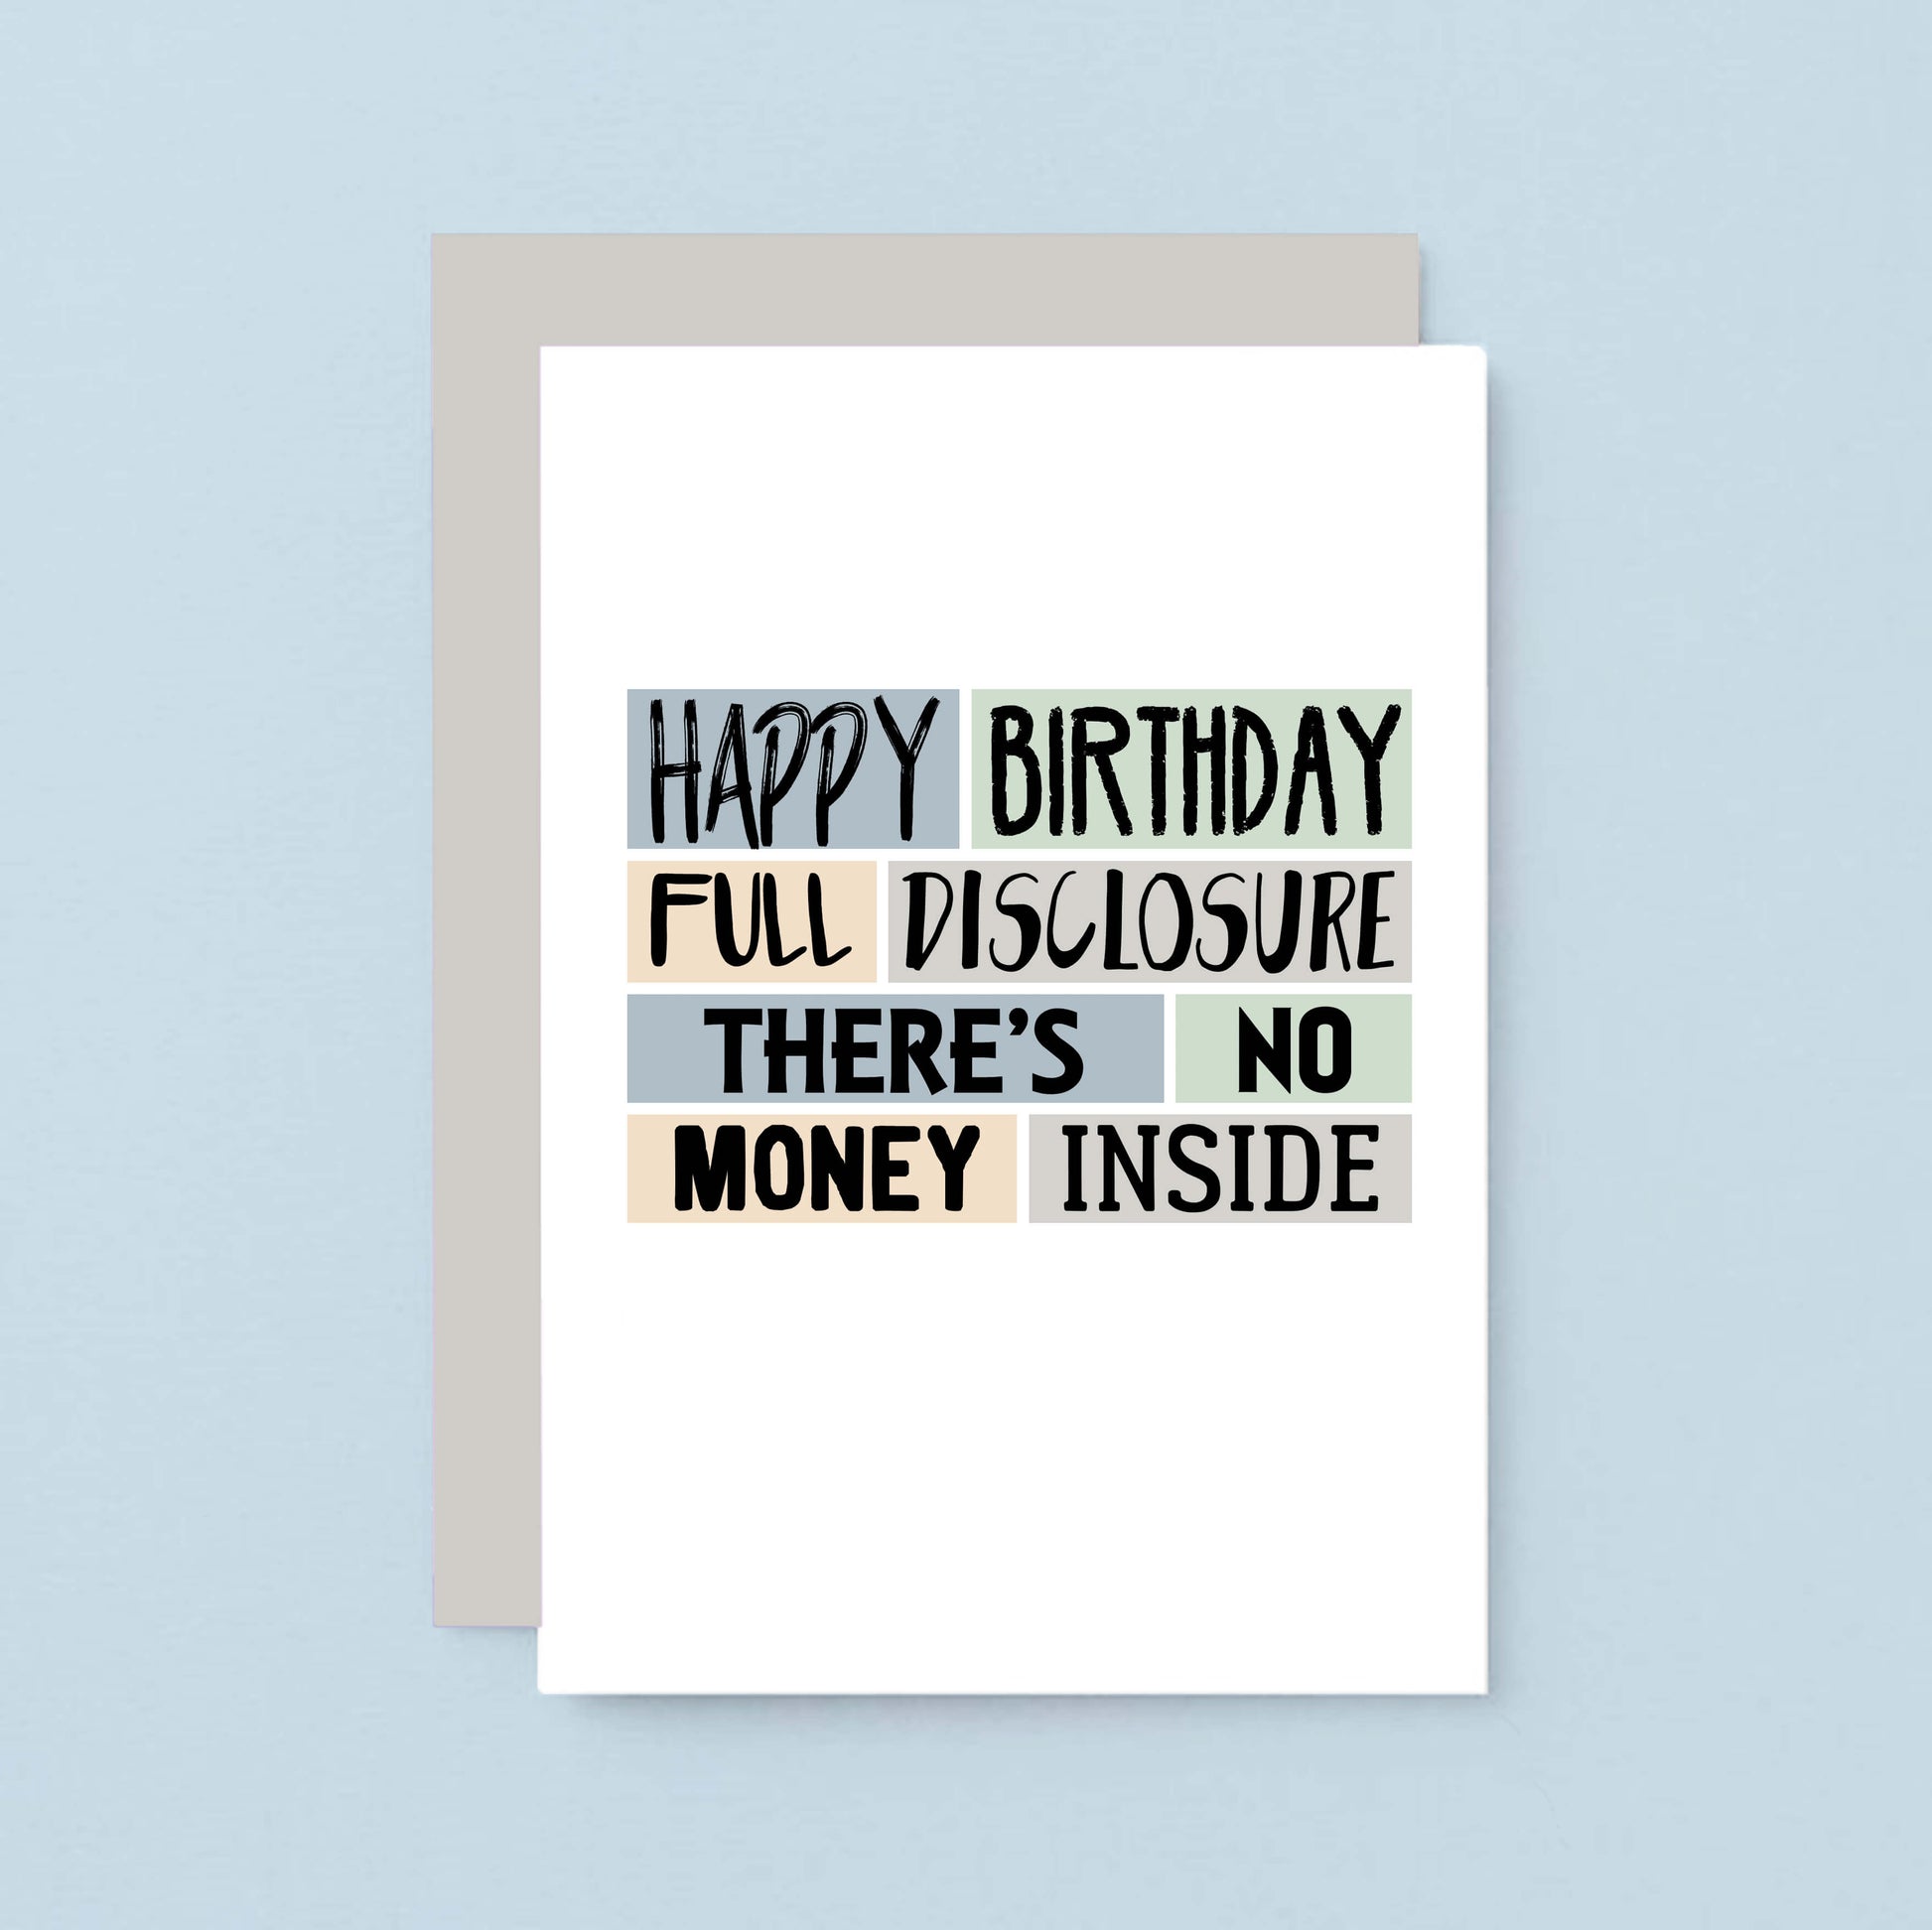 Birthday Card by SixElevenCreations. Reads Happy birthday Fully disclosure There's no money inside. Product Code SE0260A6